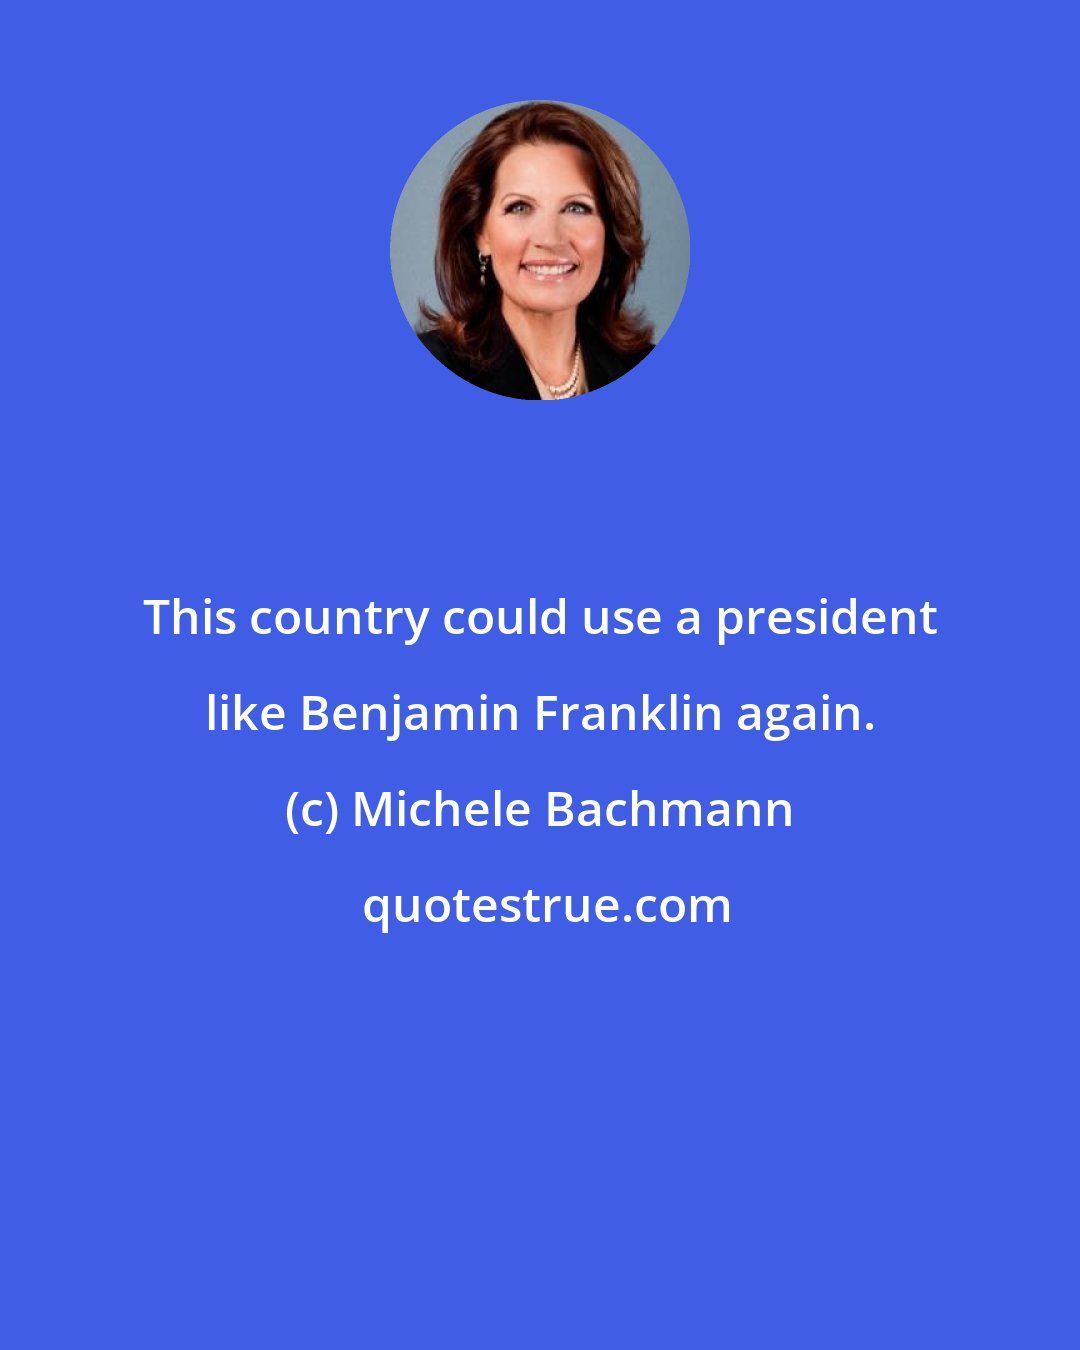 Michele Bachmann: This country could use a president like Benjamin Franklin again.